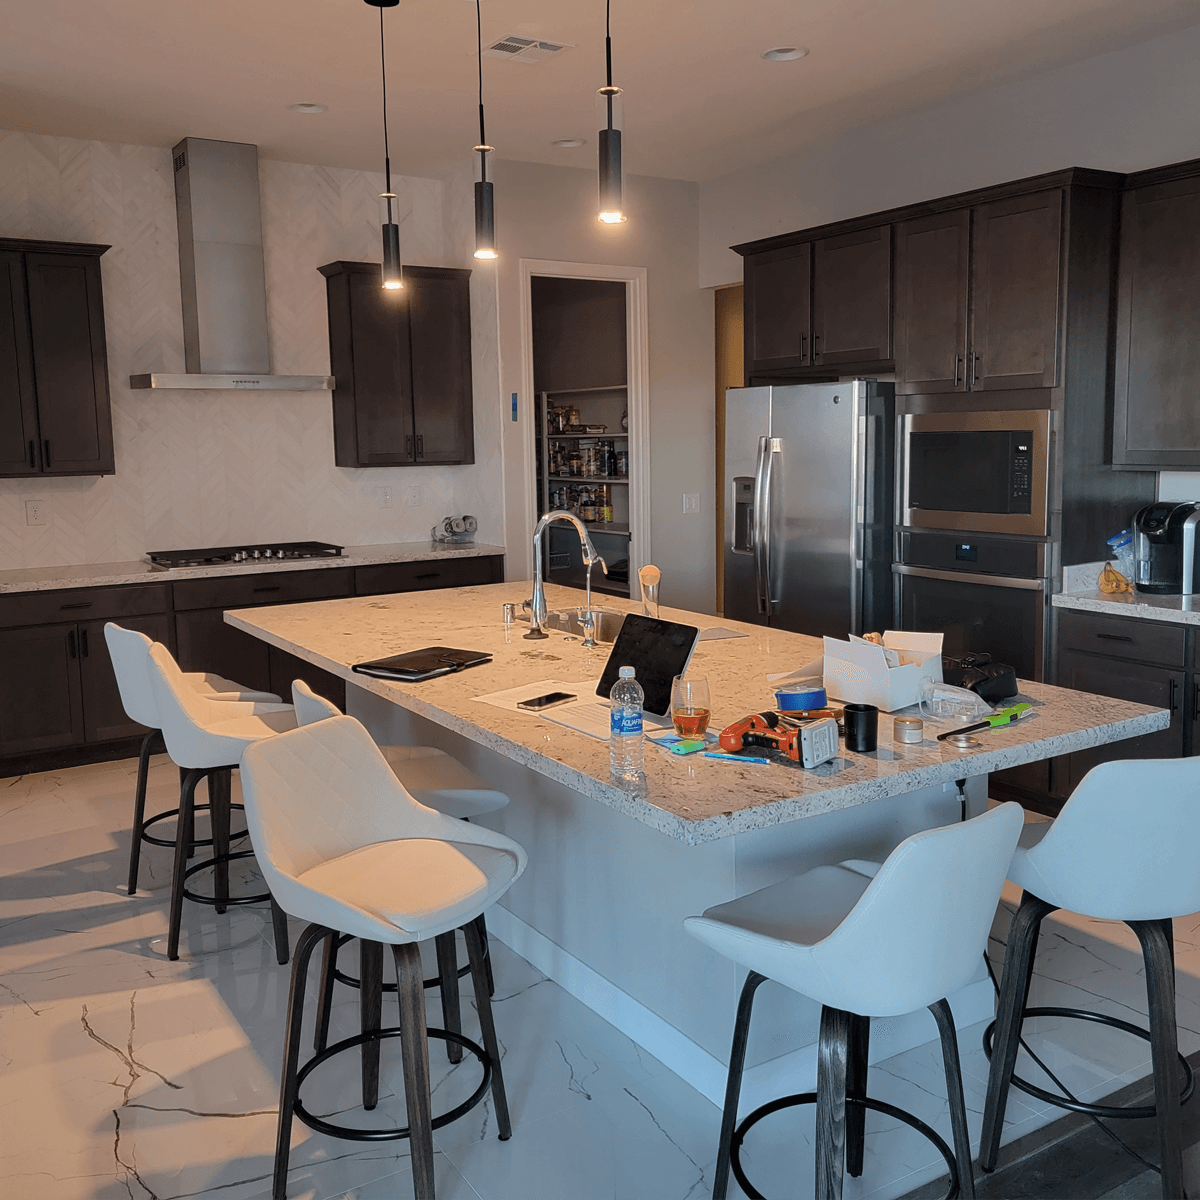 Top Builders construction services in Las Vegas provide quality craftsmanship, meticulous attention to detail, and timely execution on all your projects for home renovations in Las Vegas.